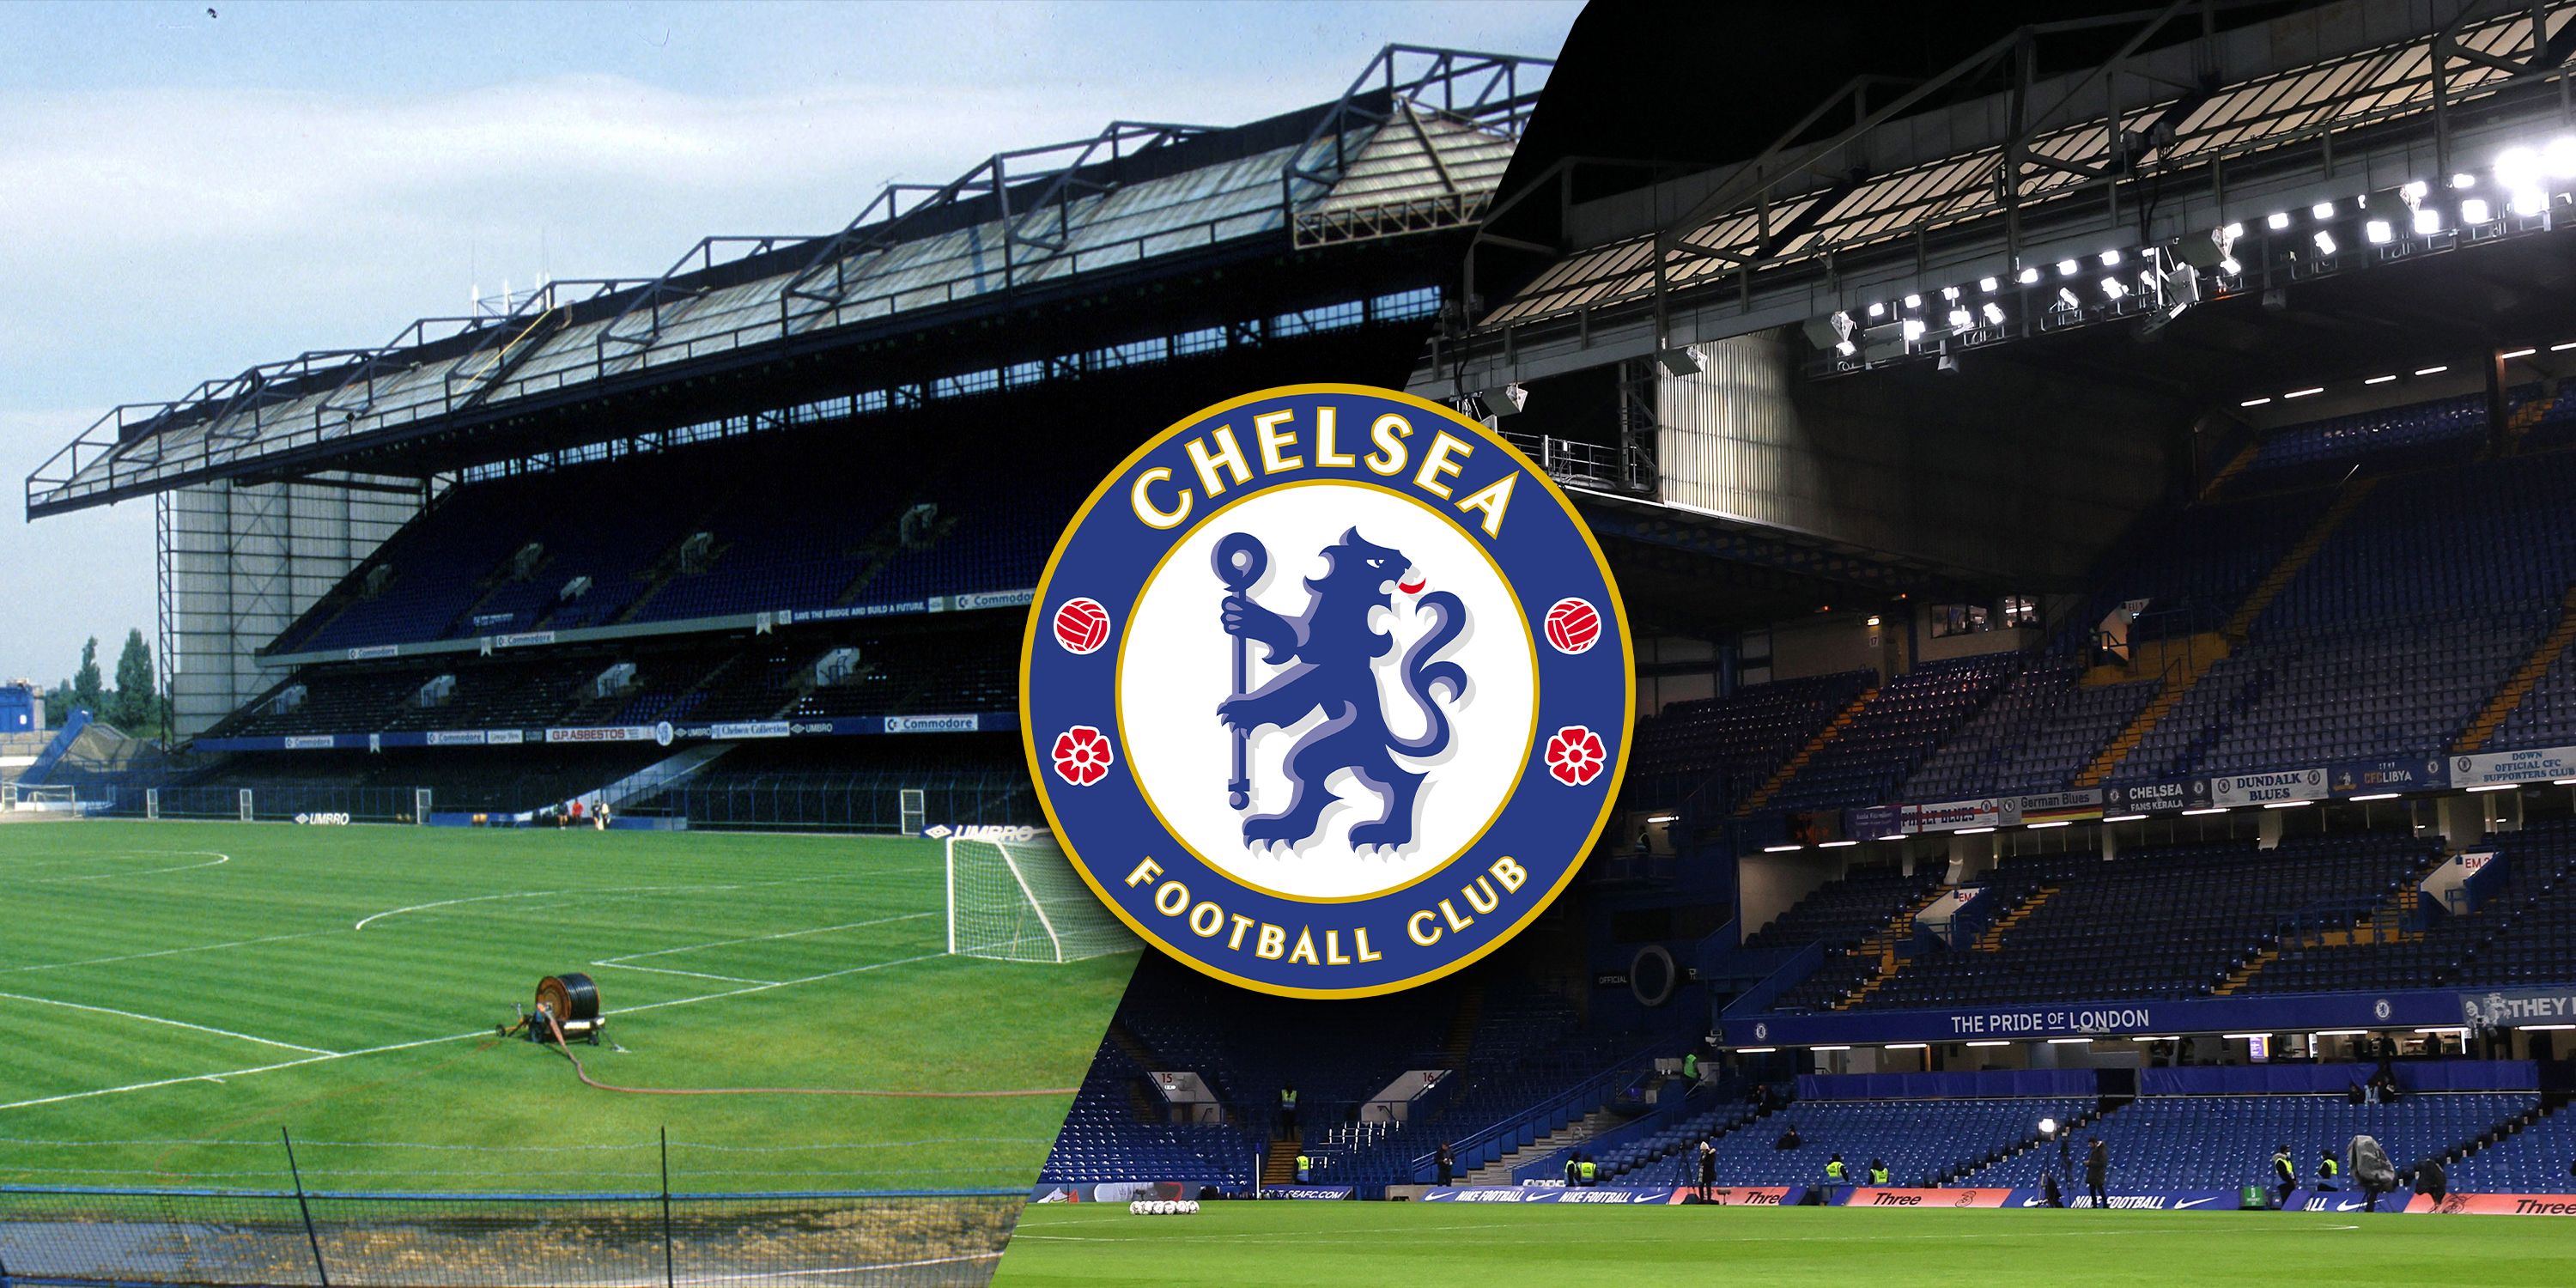 Stamford Bridge in 1988 and 2024 with the Chelsea crest.